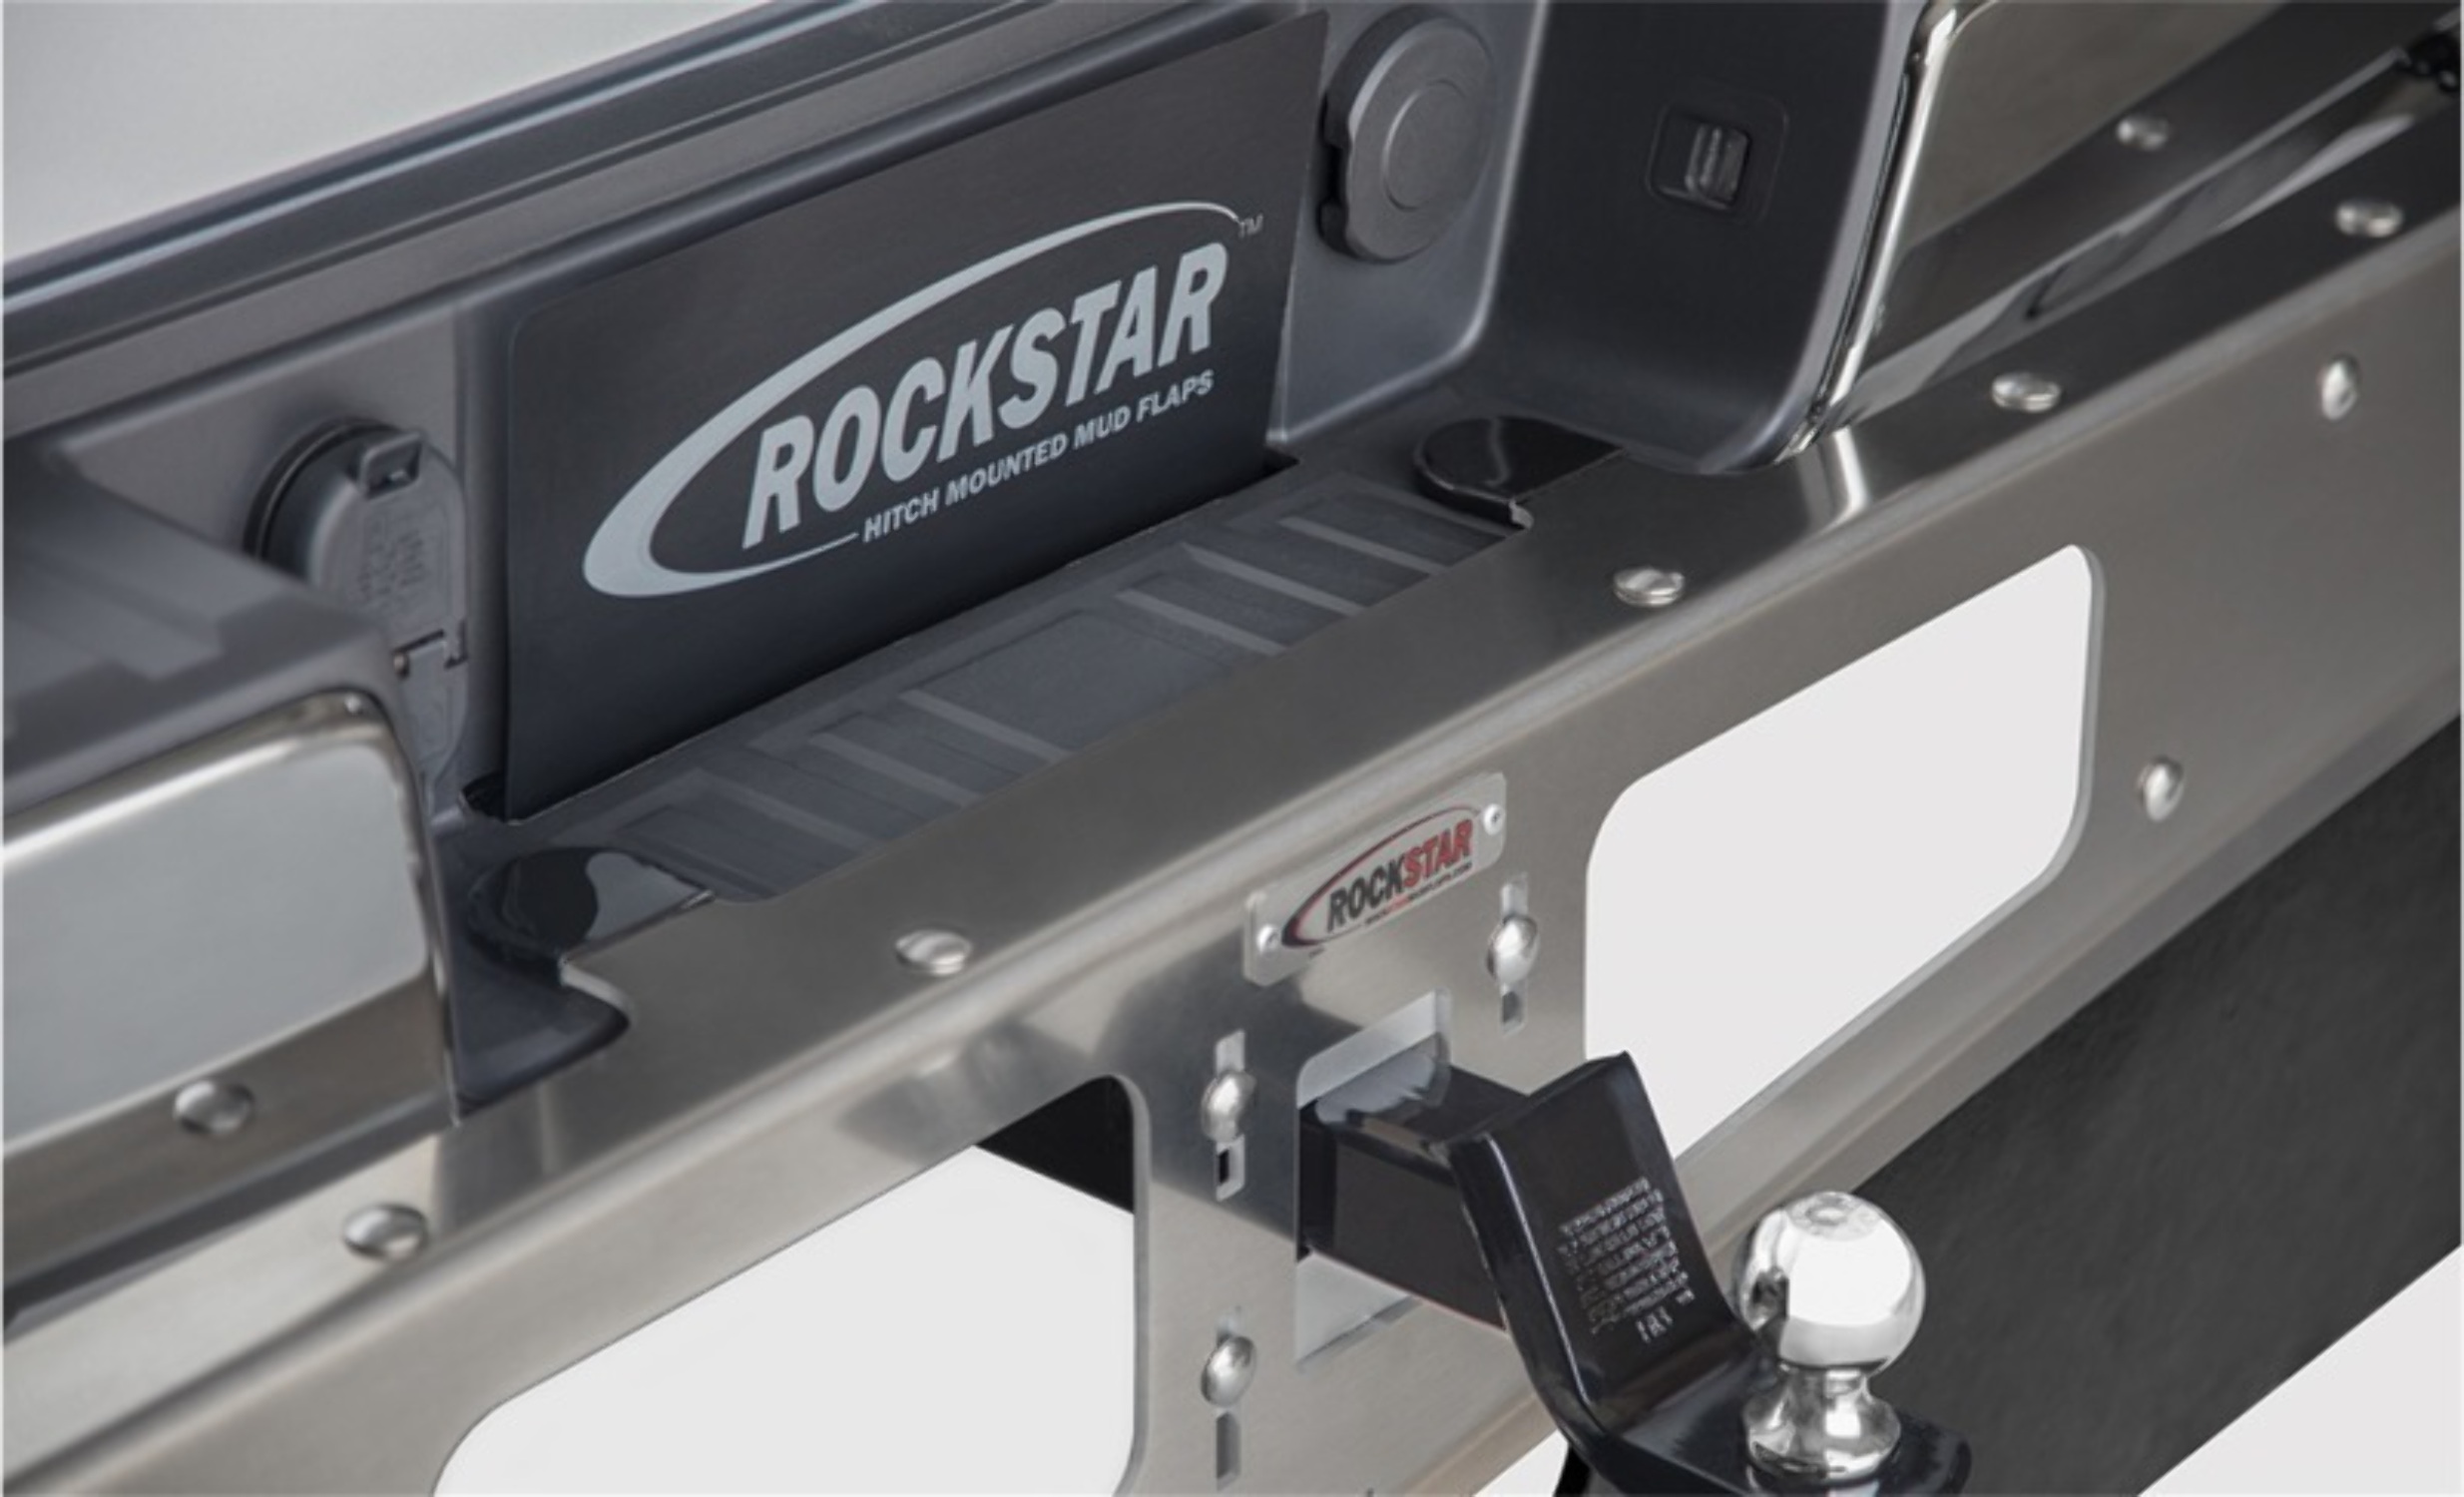 Access Rockstar Hitch Ford Make F - 150 2X Smooth Mill Finish Mounted Mud Flaps Fits select: 2004-2009 FORD F150, 2013-2014 FORD F150 SUPER CAB - image 5 of 10